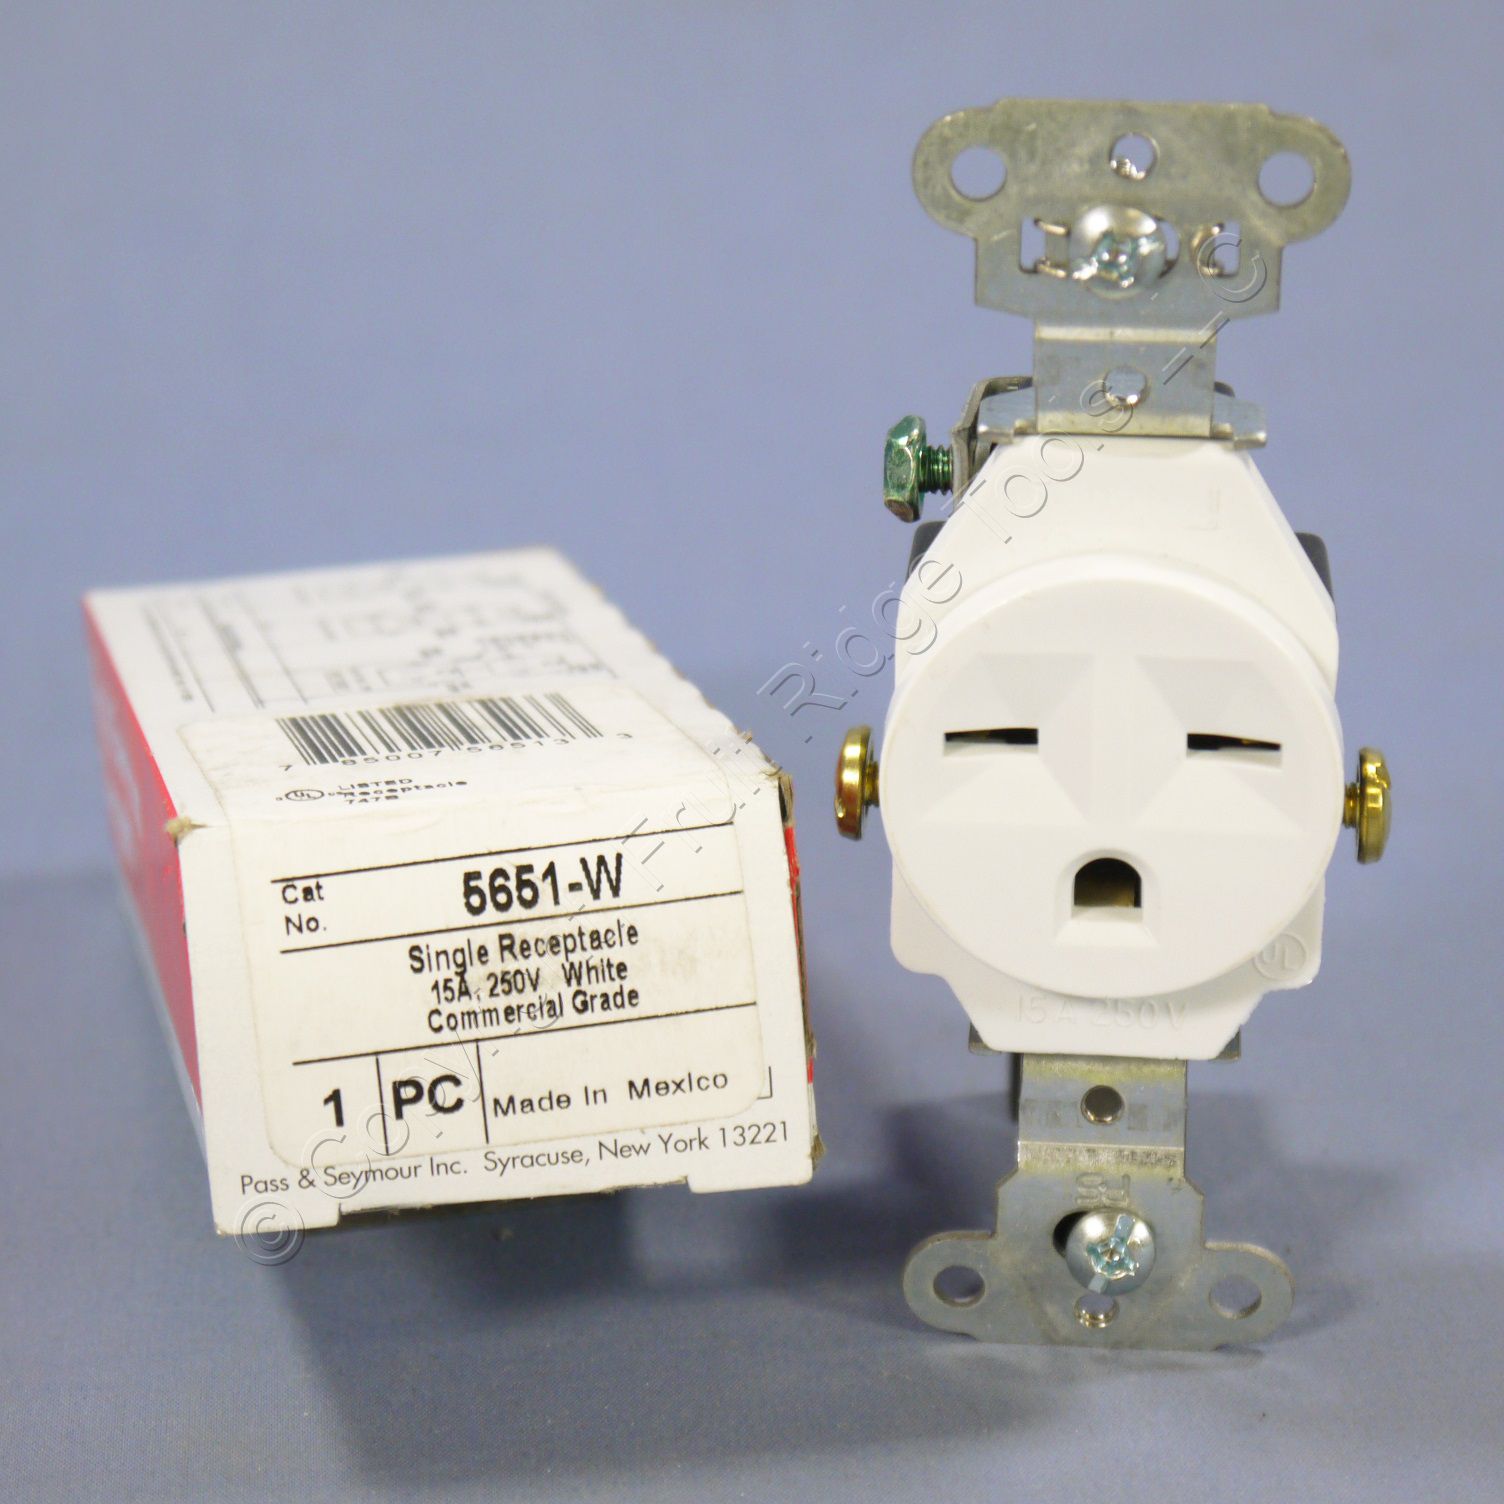 P&S White Industrial Single Outlet Receptacle NEMA 6-15R 15A 250V 5651